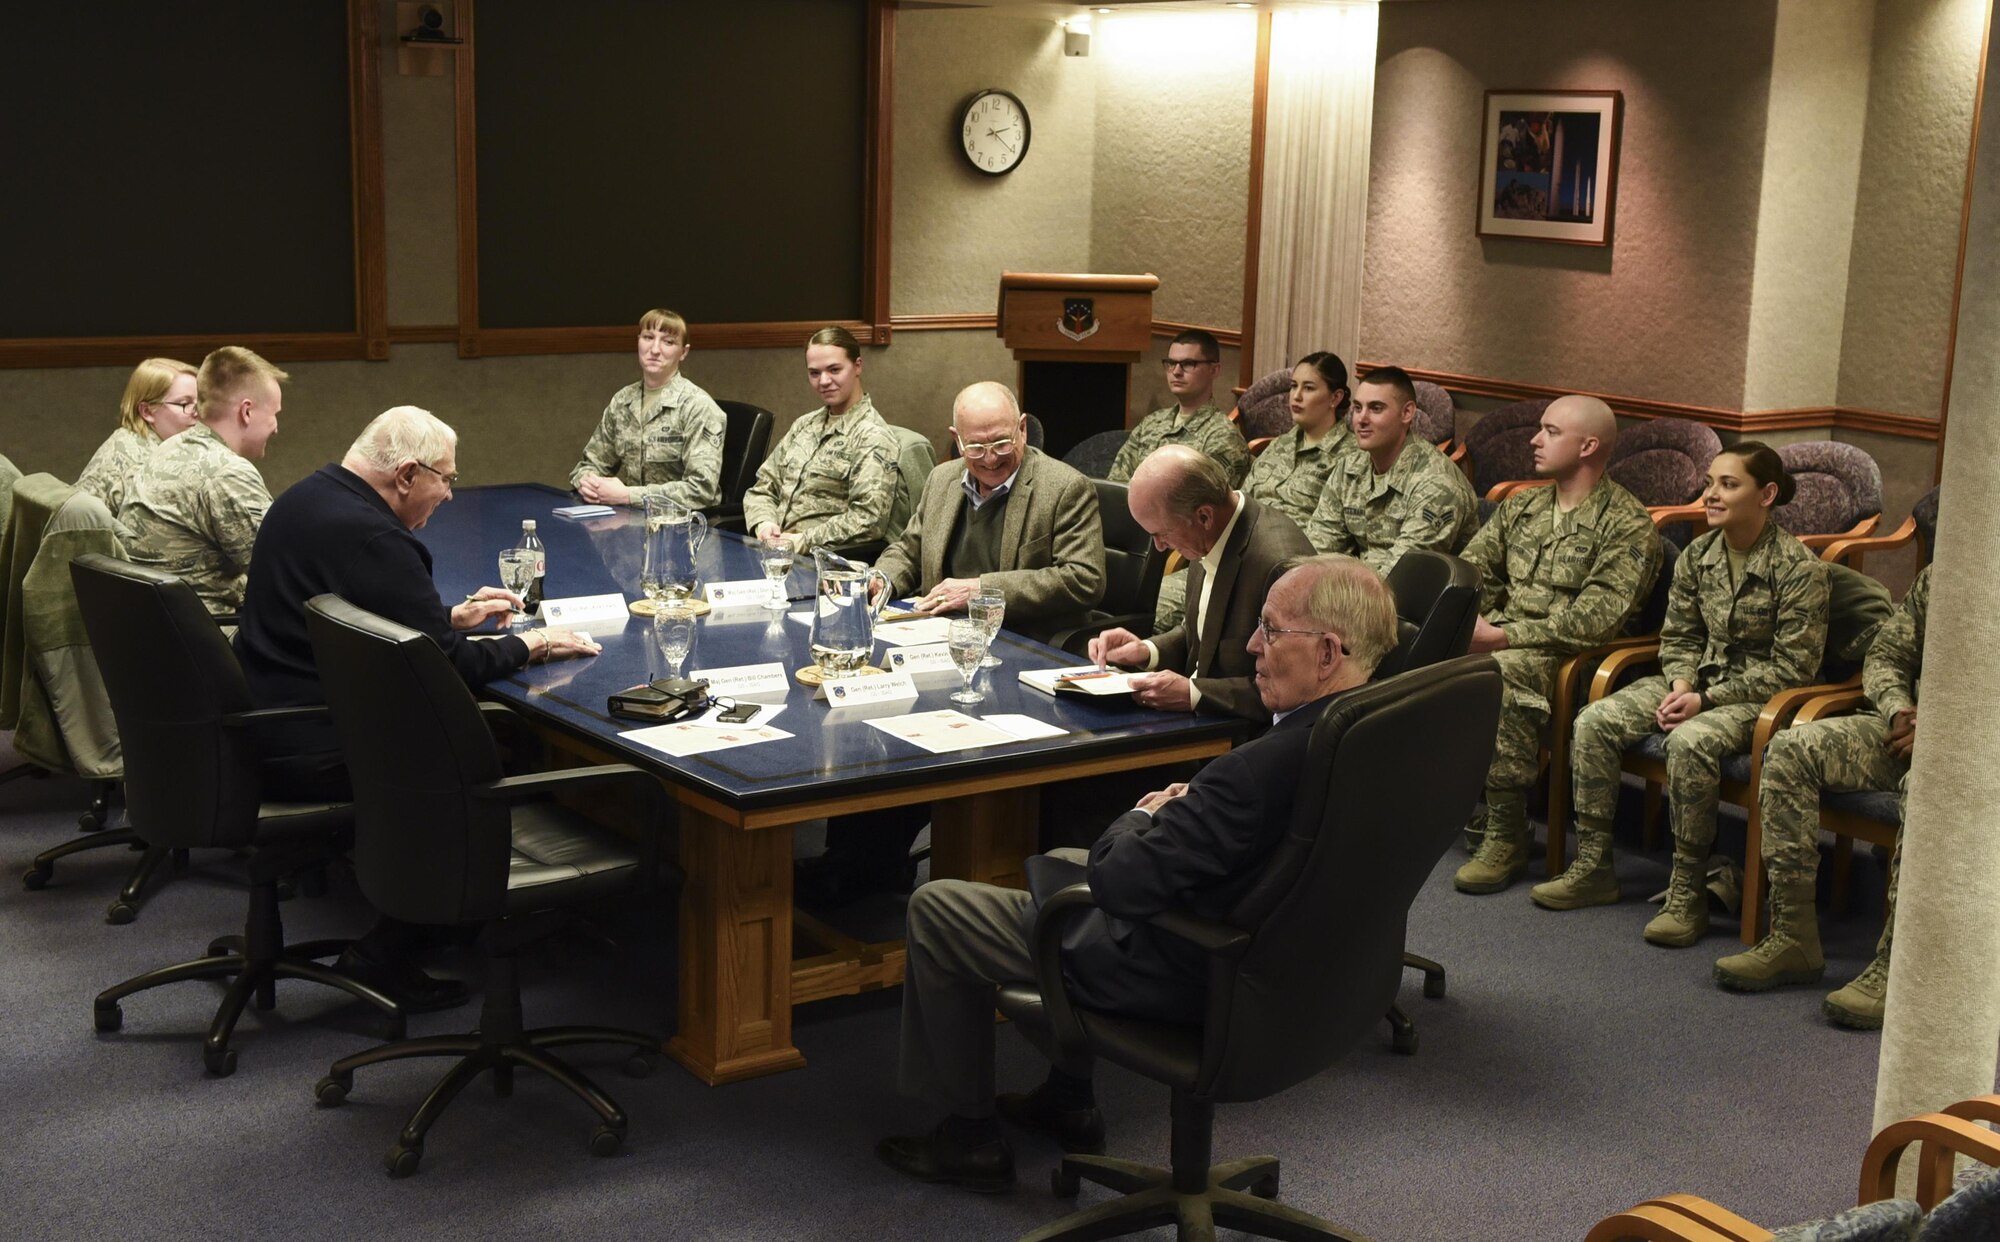 Members of the Independent Strategic Assessment Group talk to Airmen during their visit to F.E. Warren Air Force Base, Wyo., March 6, 2017. The discussion covered several topics from quality of life issues to improving systems and processes. This was the first missile wing visit on the ISAG’s agenda as it initiates a strategic-level assessment and review of Air Force Global Strike Command operations. (U.S. Air Force photo by Terry Higgins)  